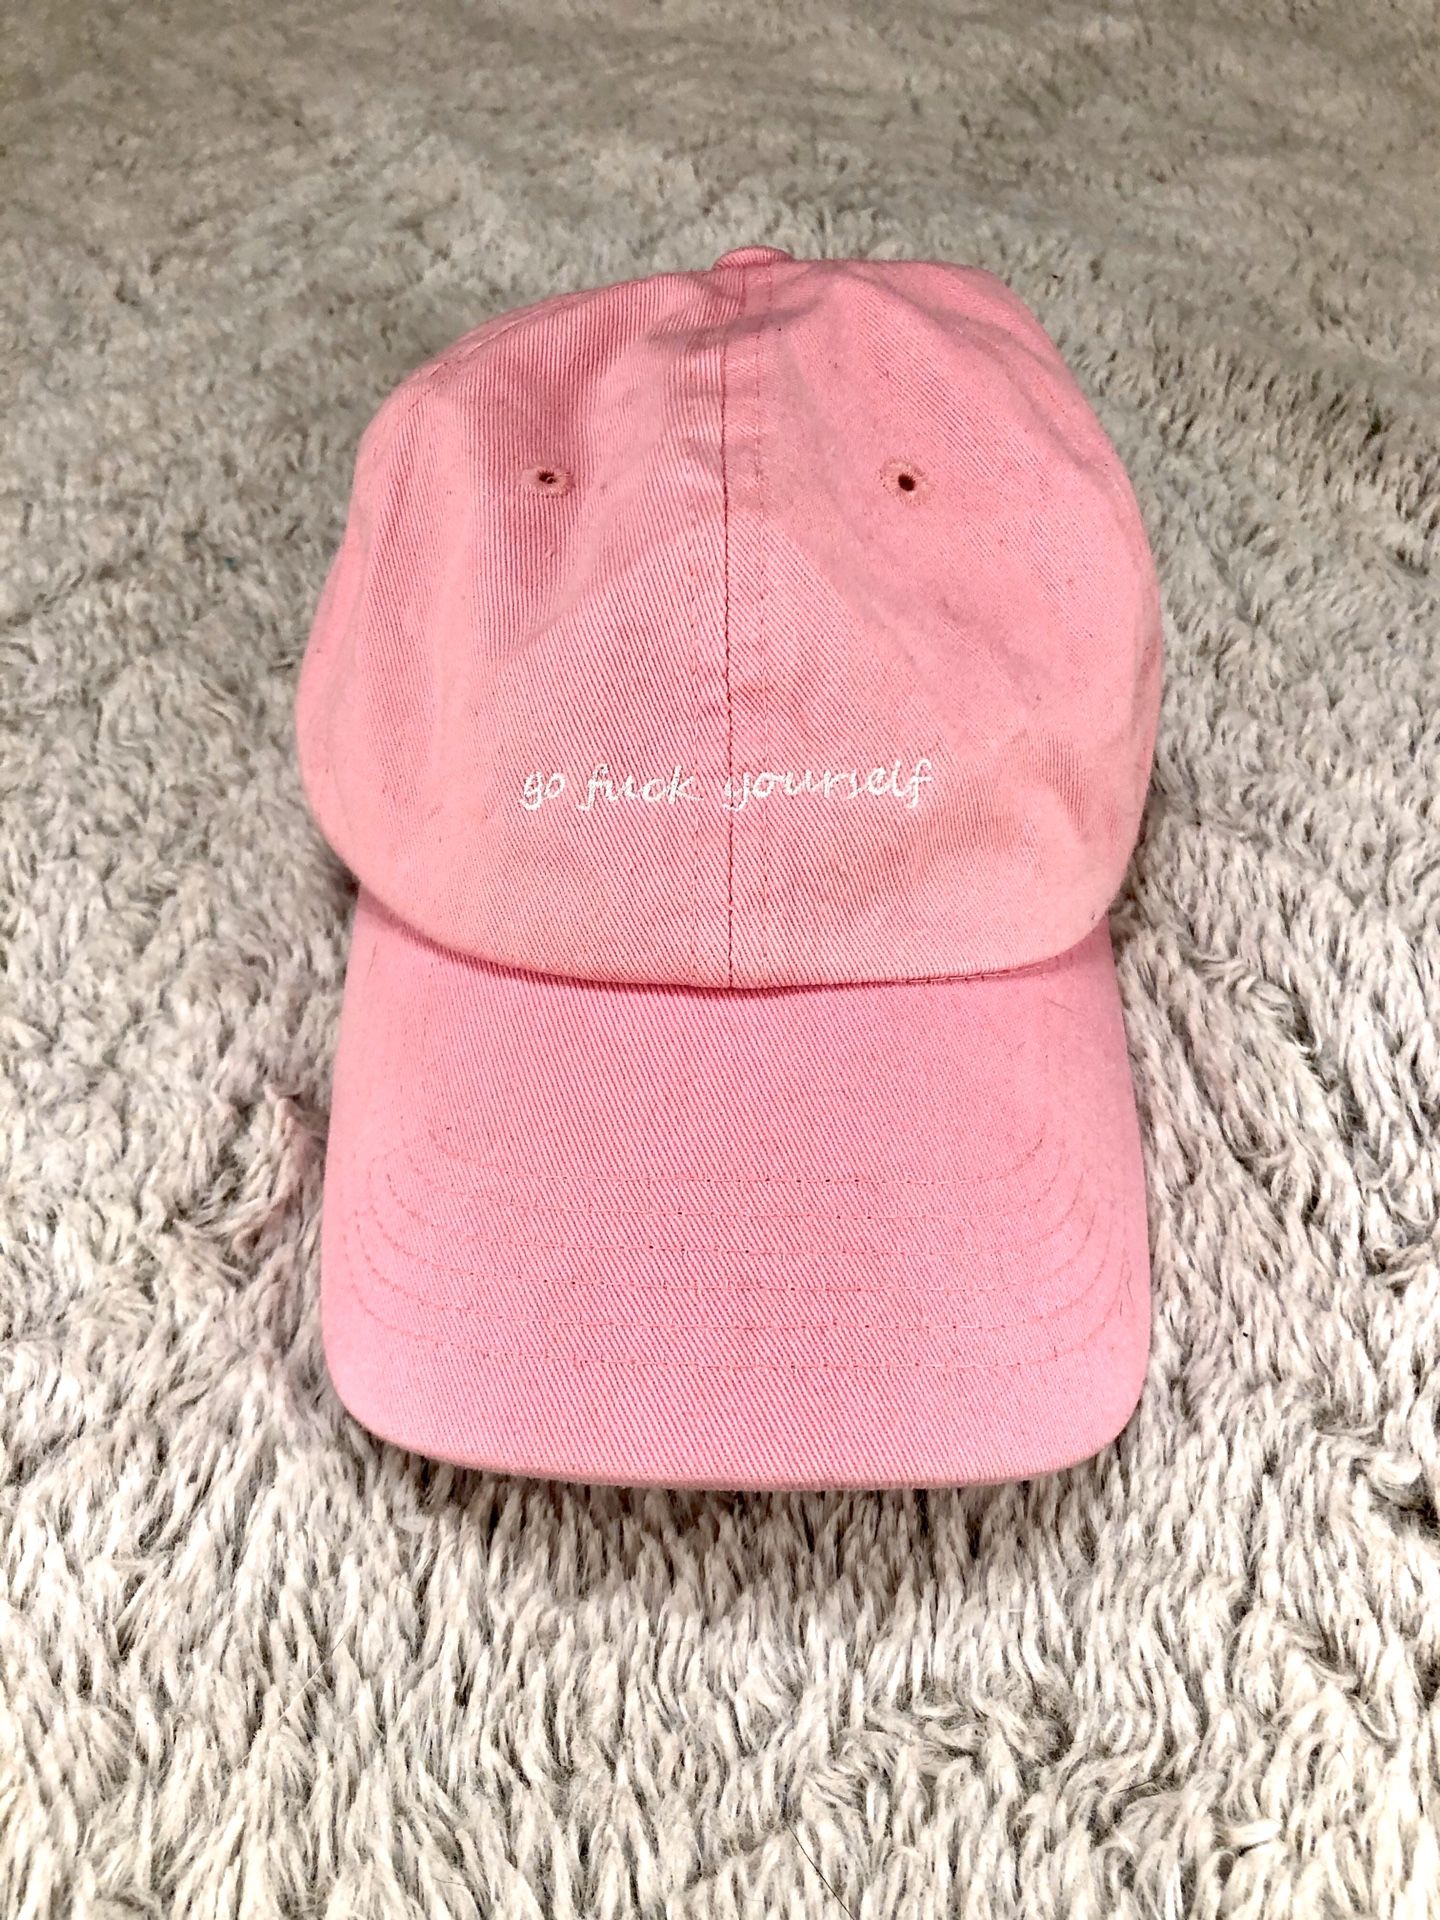 Go F*ck Yourself Pink Hat